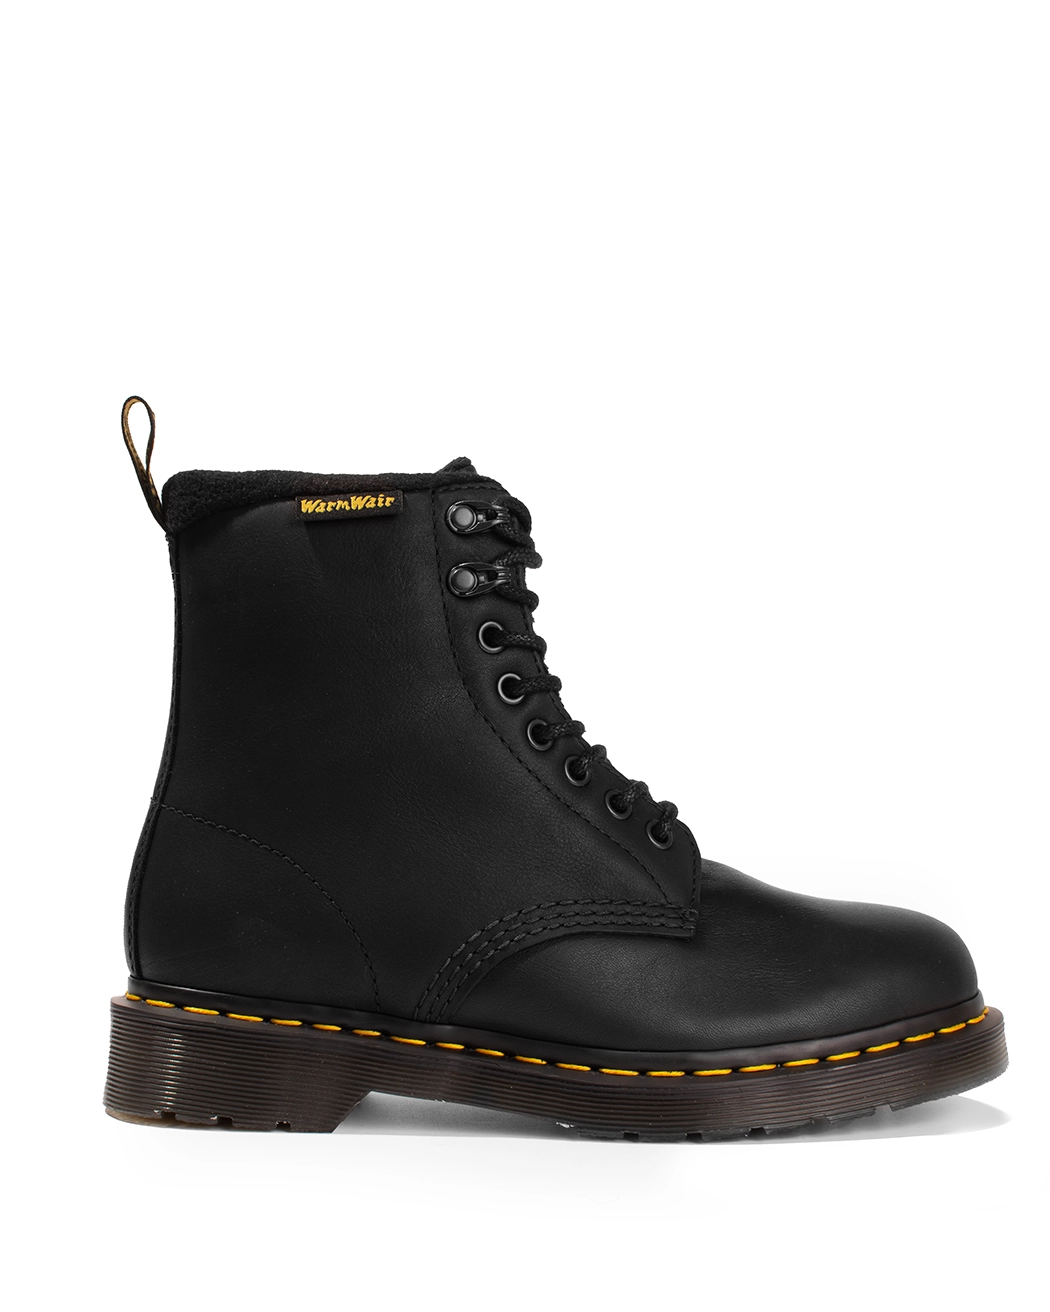 dr Martens Boots - discontinued - discontinued